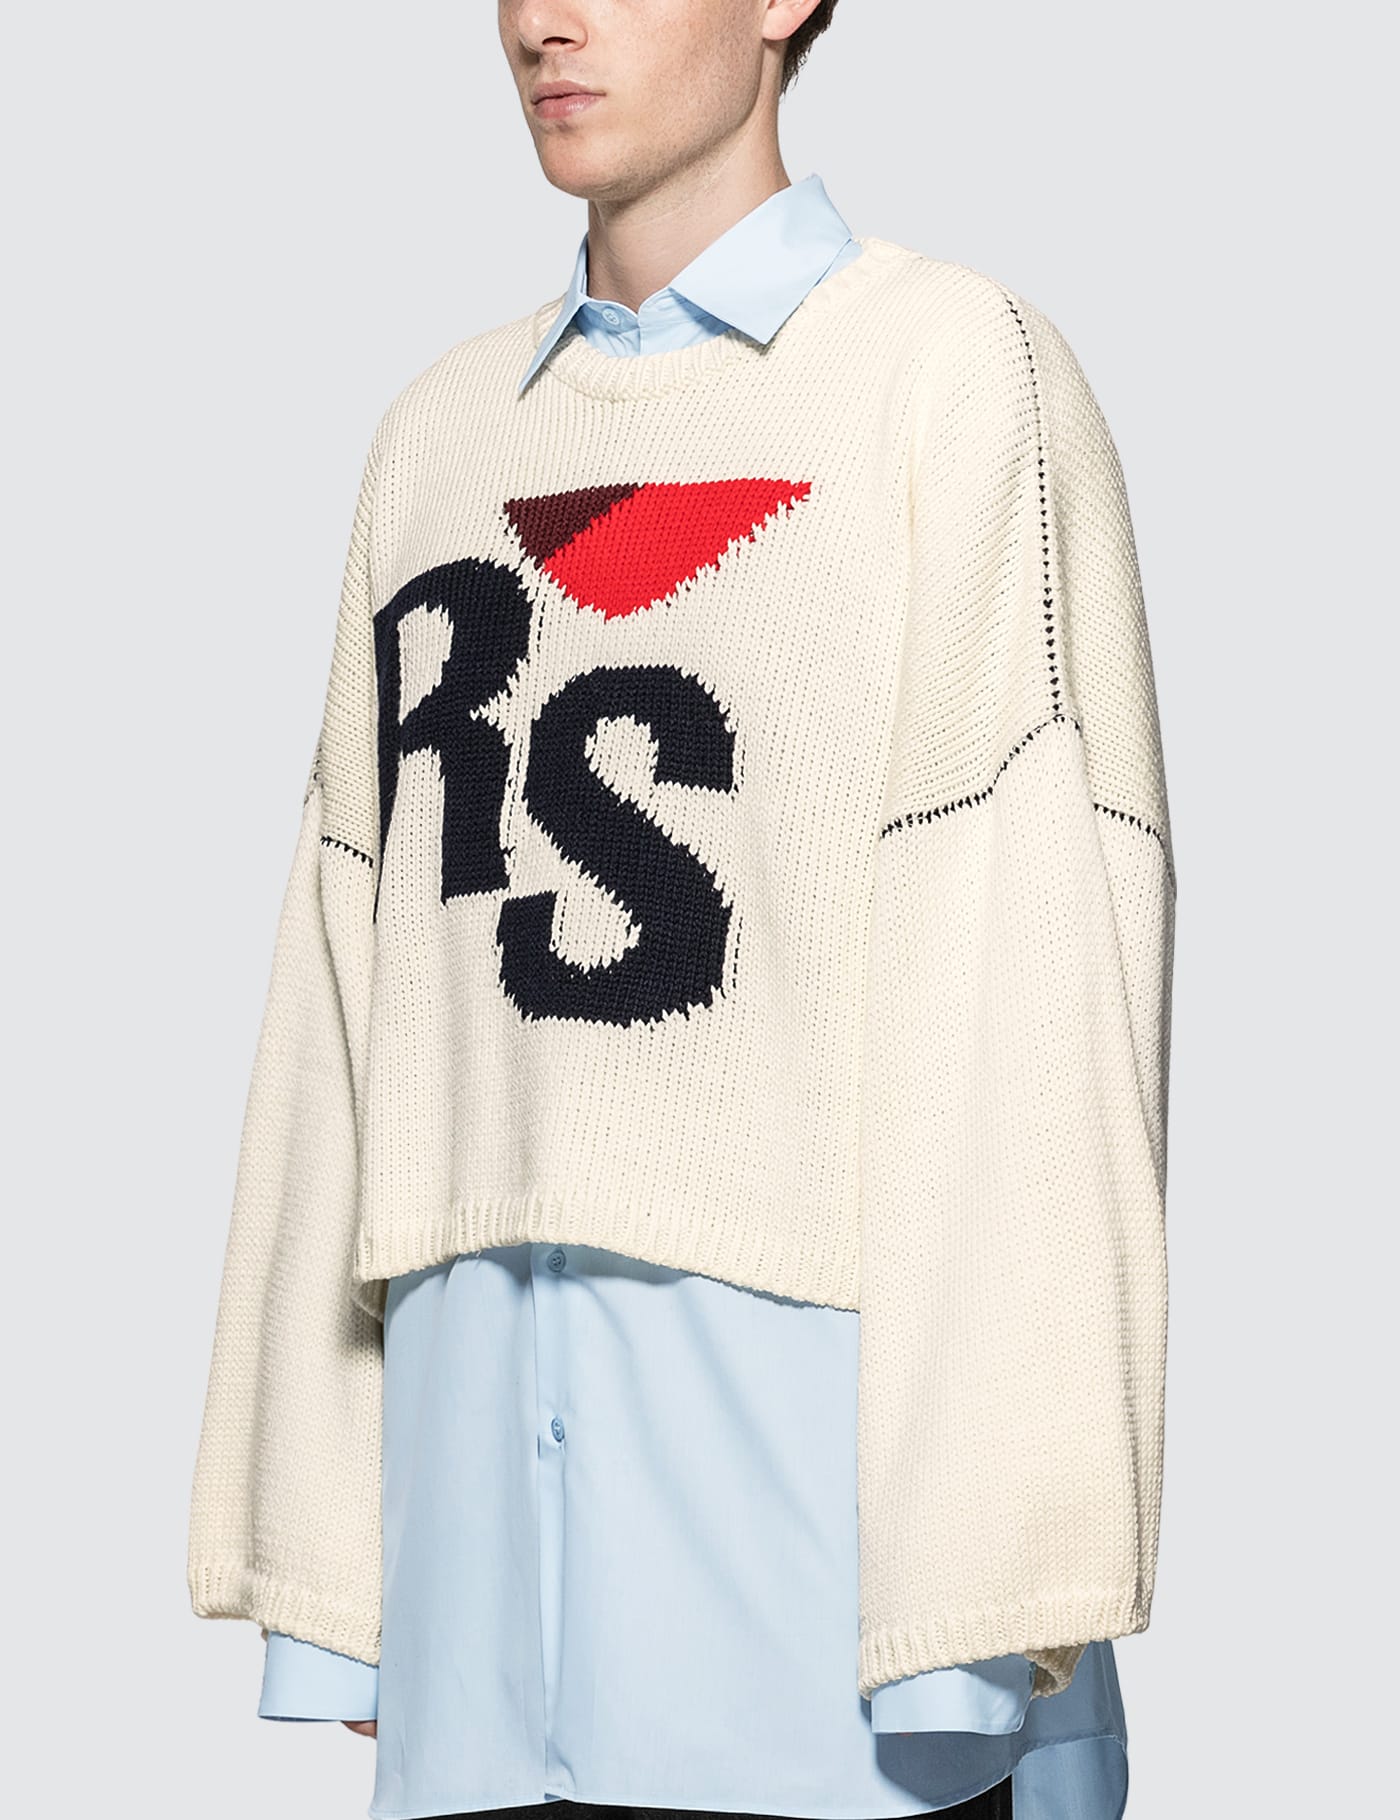 Raf Simons - Cropped RS Sweater | HBX - Globally Curated Fashion 